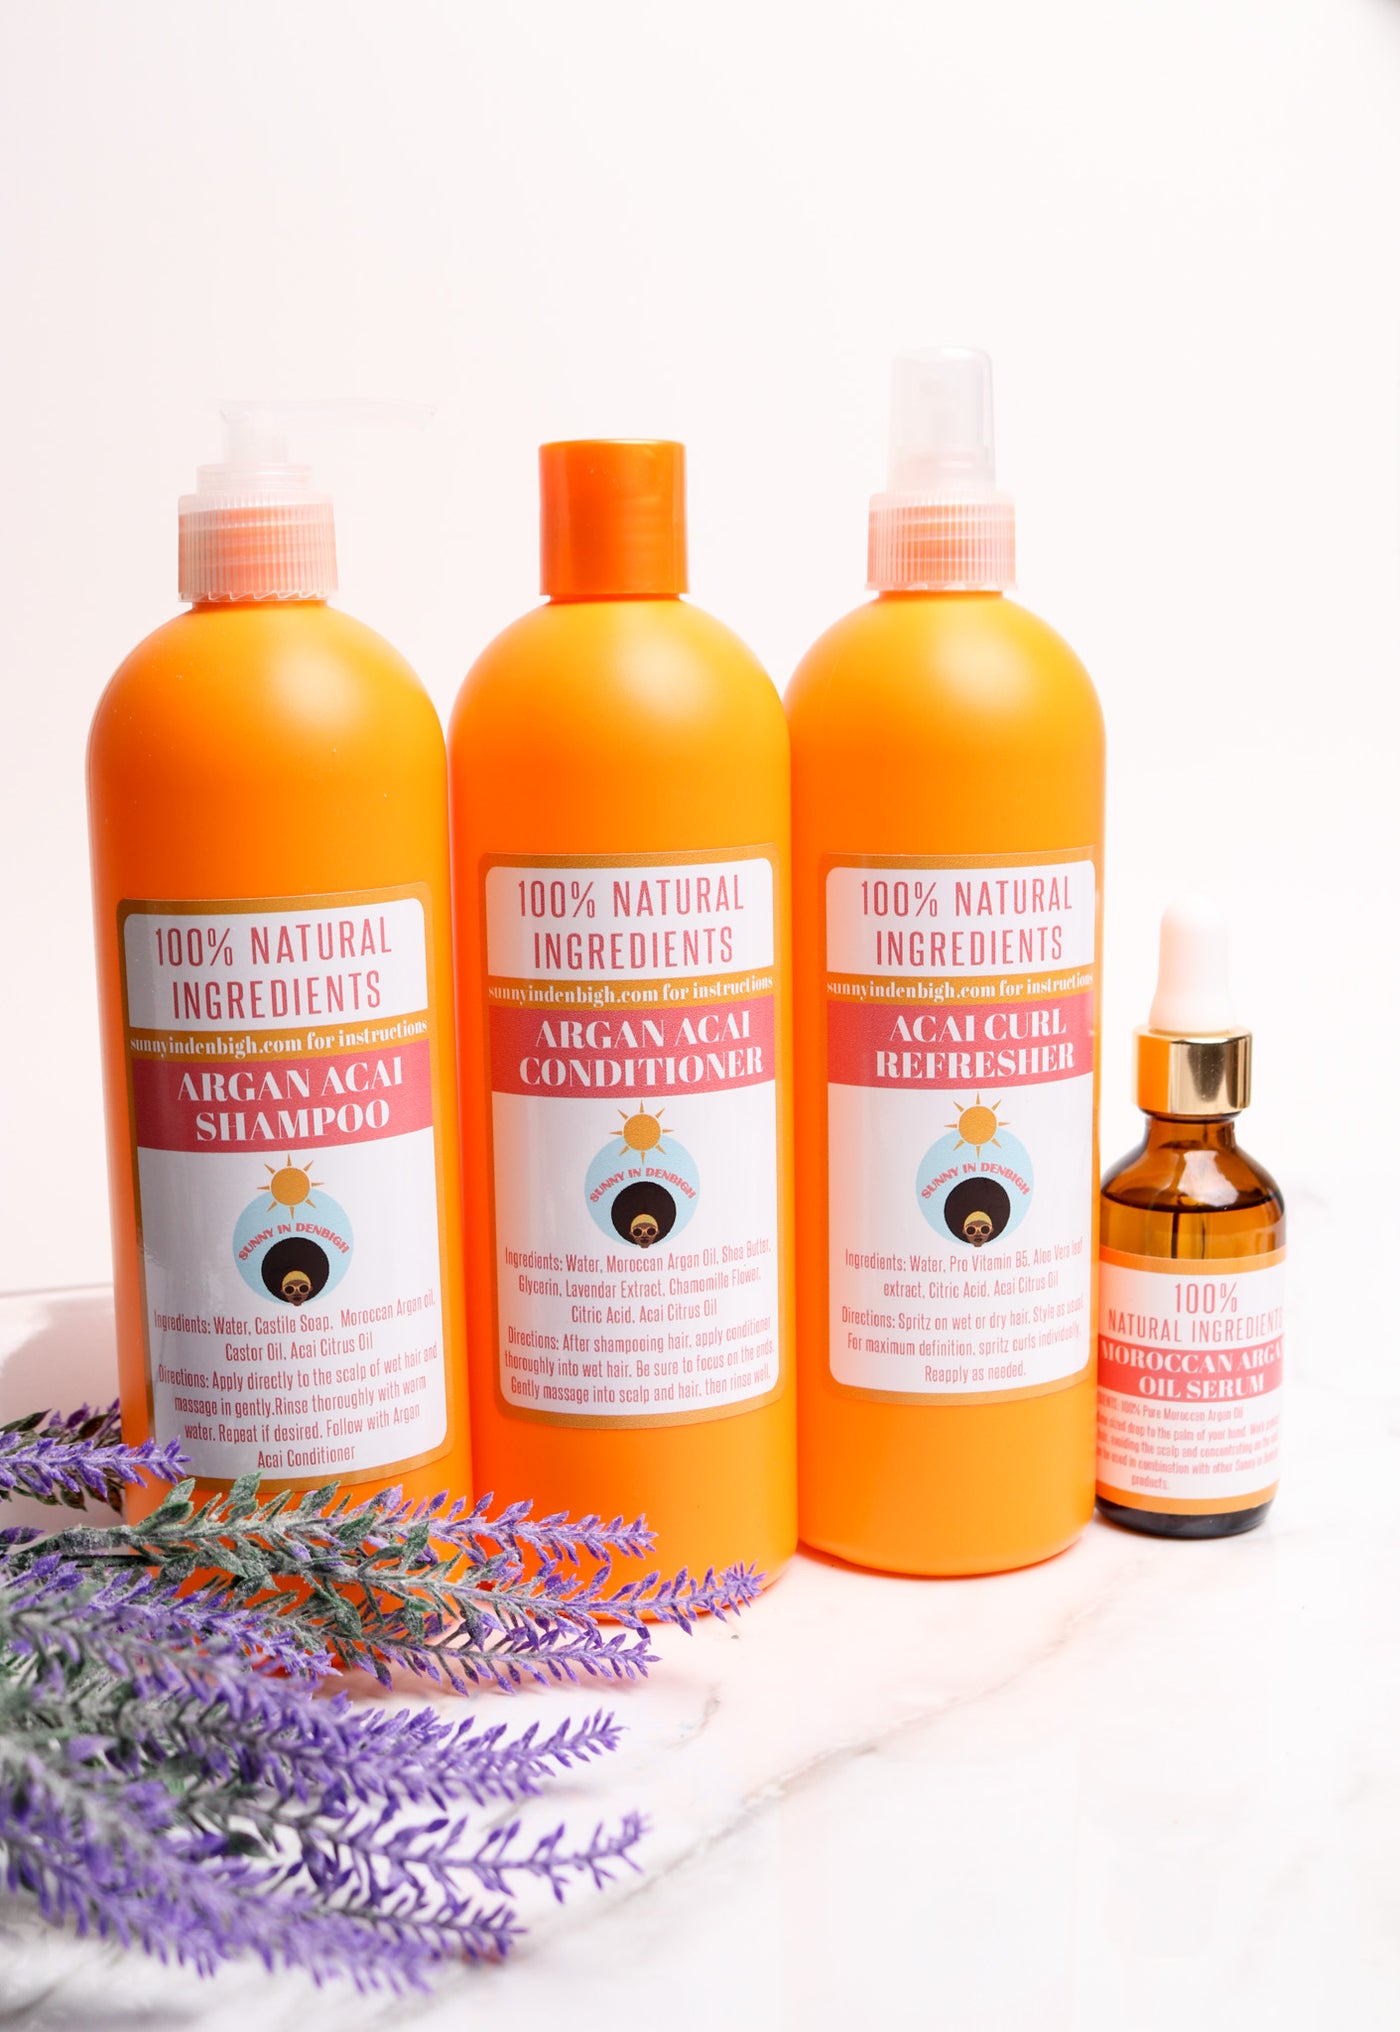 Our New Sunny In Denbigh Argan Acai Bundle is made with 100% Argan oil from Morocco!! The items in this bundle will strengthen, moisturize, growth, detangle, repair and strengthen your hair! 16 oz Argan Acai bundle